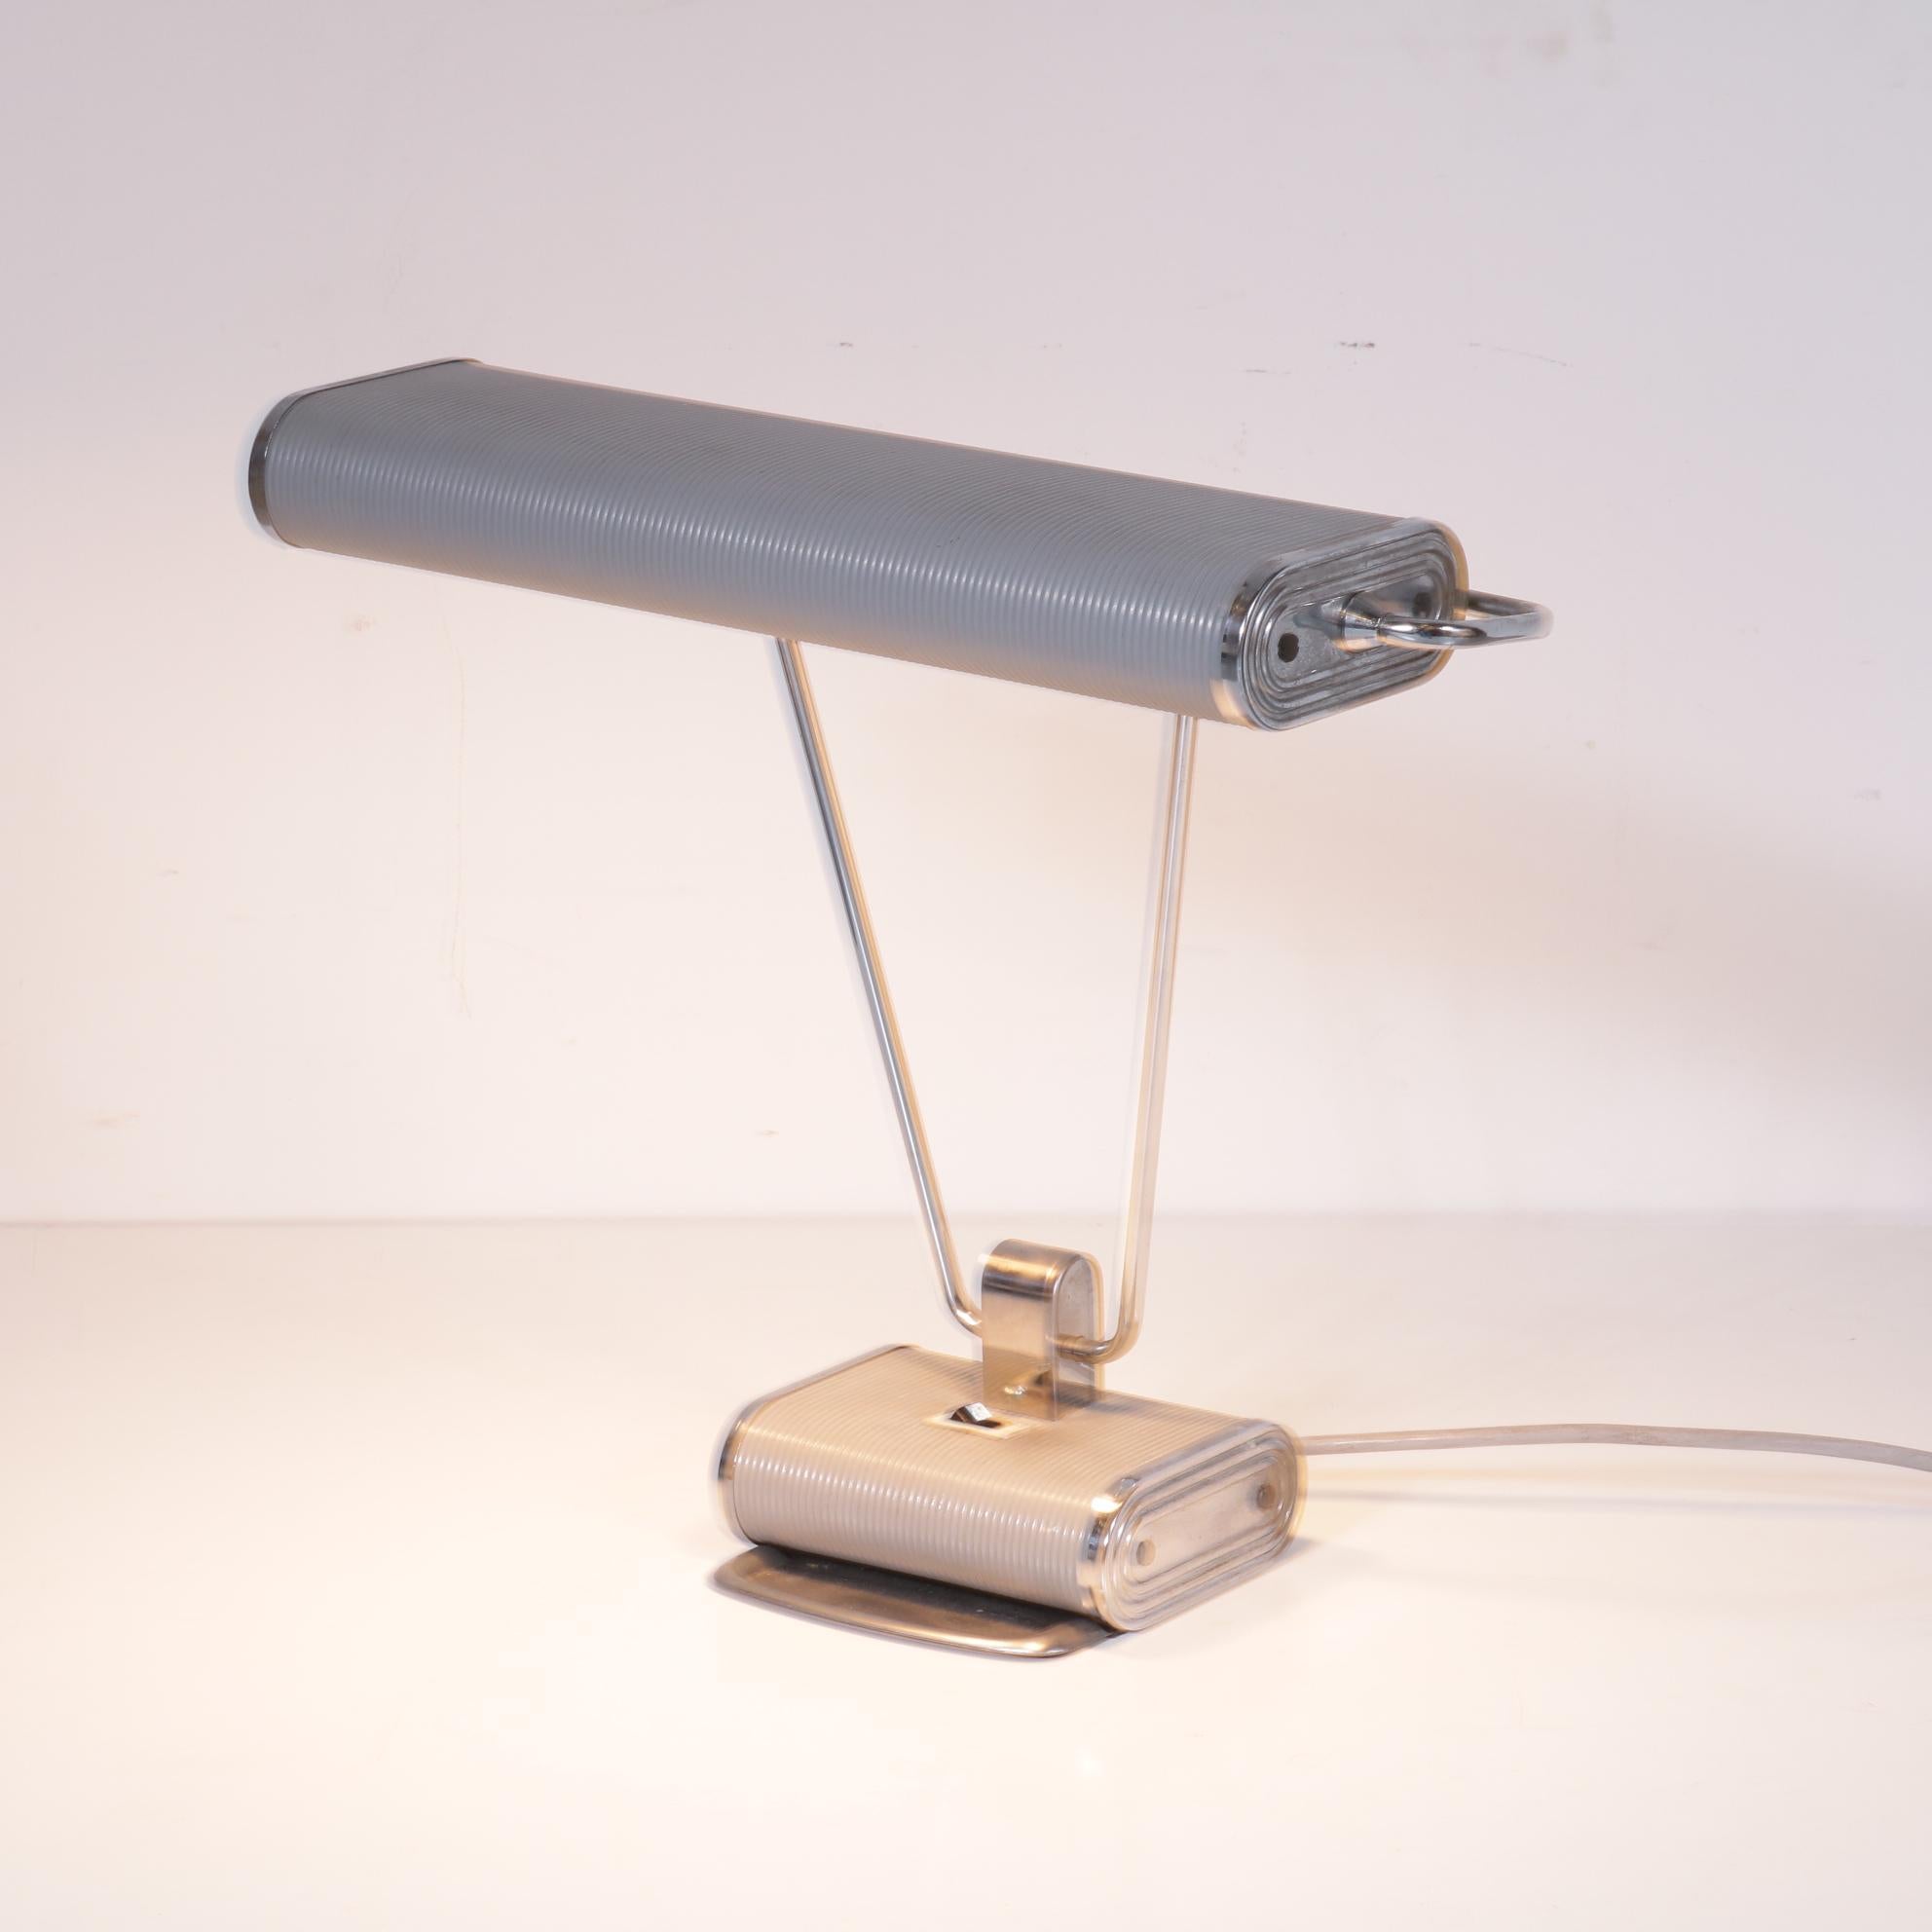 Beautiful desk lamp designed by Eileen Gray, manufactured by Jumo in France, circa 1940.

This eye-catching Art Deco lamp is made of beautiful quality grey and chrome plated metal. The hood and foot has a ribbed finish, which creates a luxurious